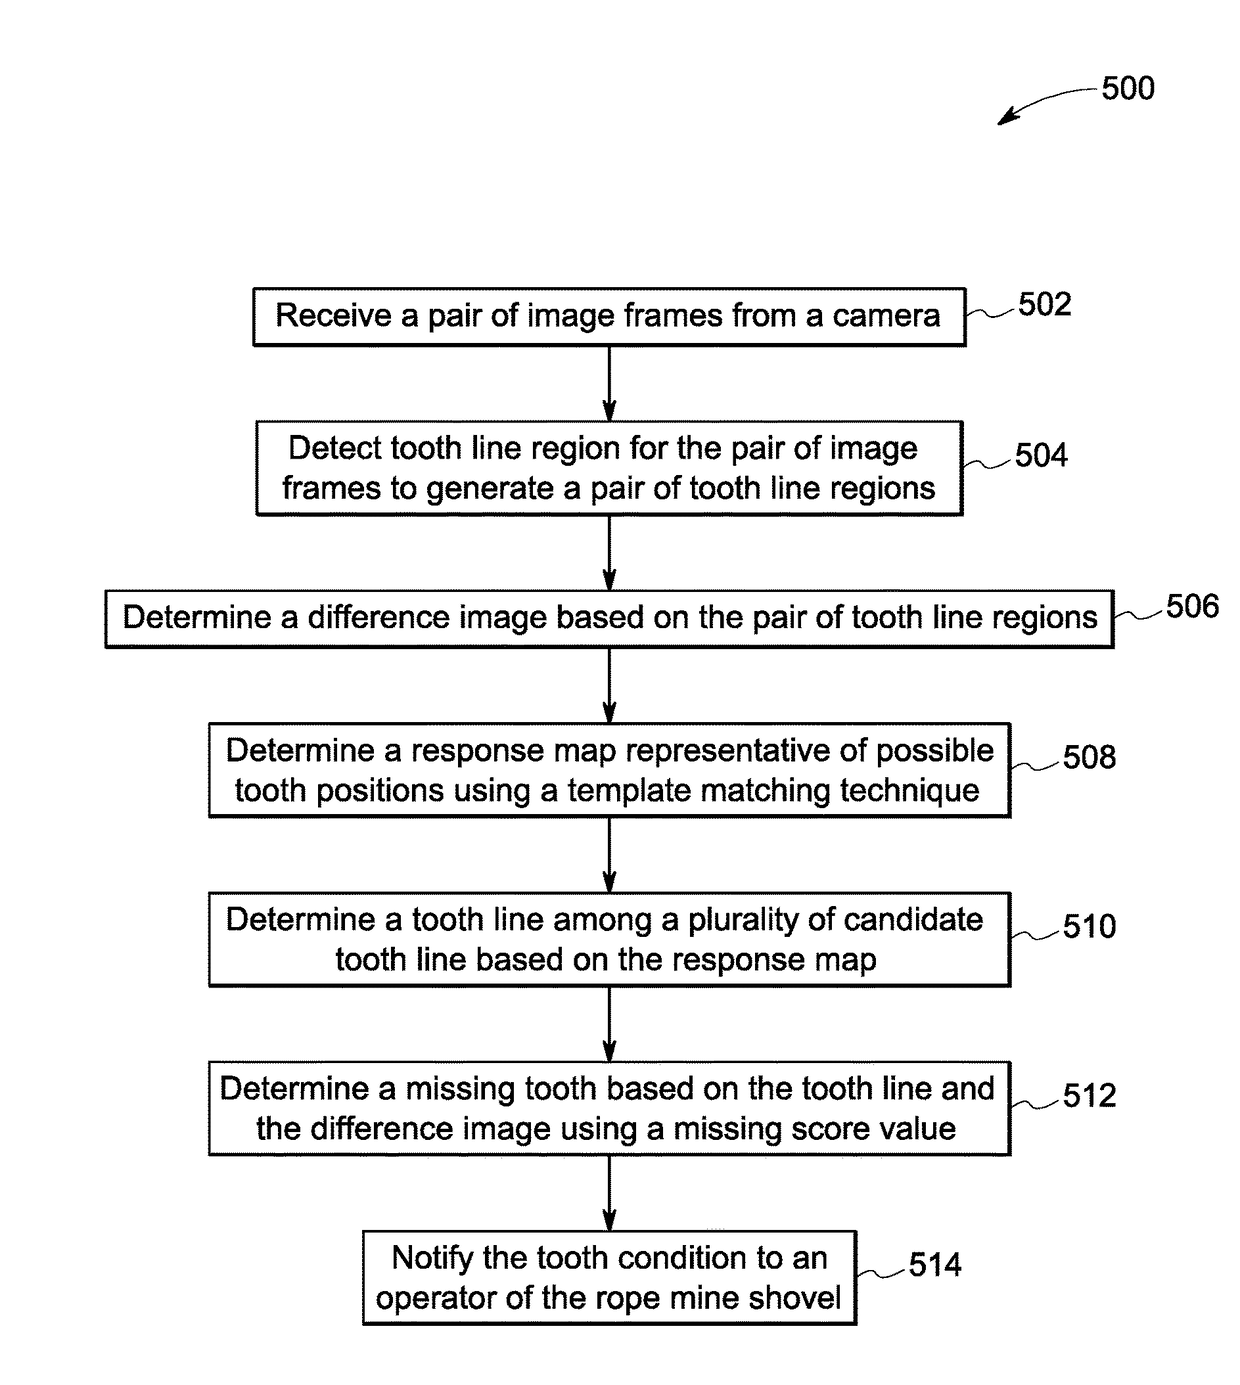 System and method for detecting missing tooth in mining shovel